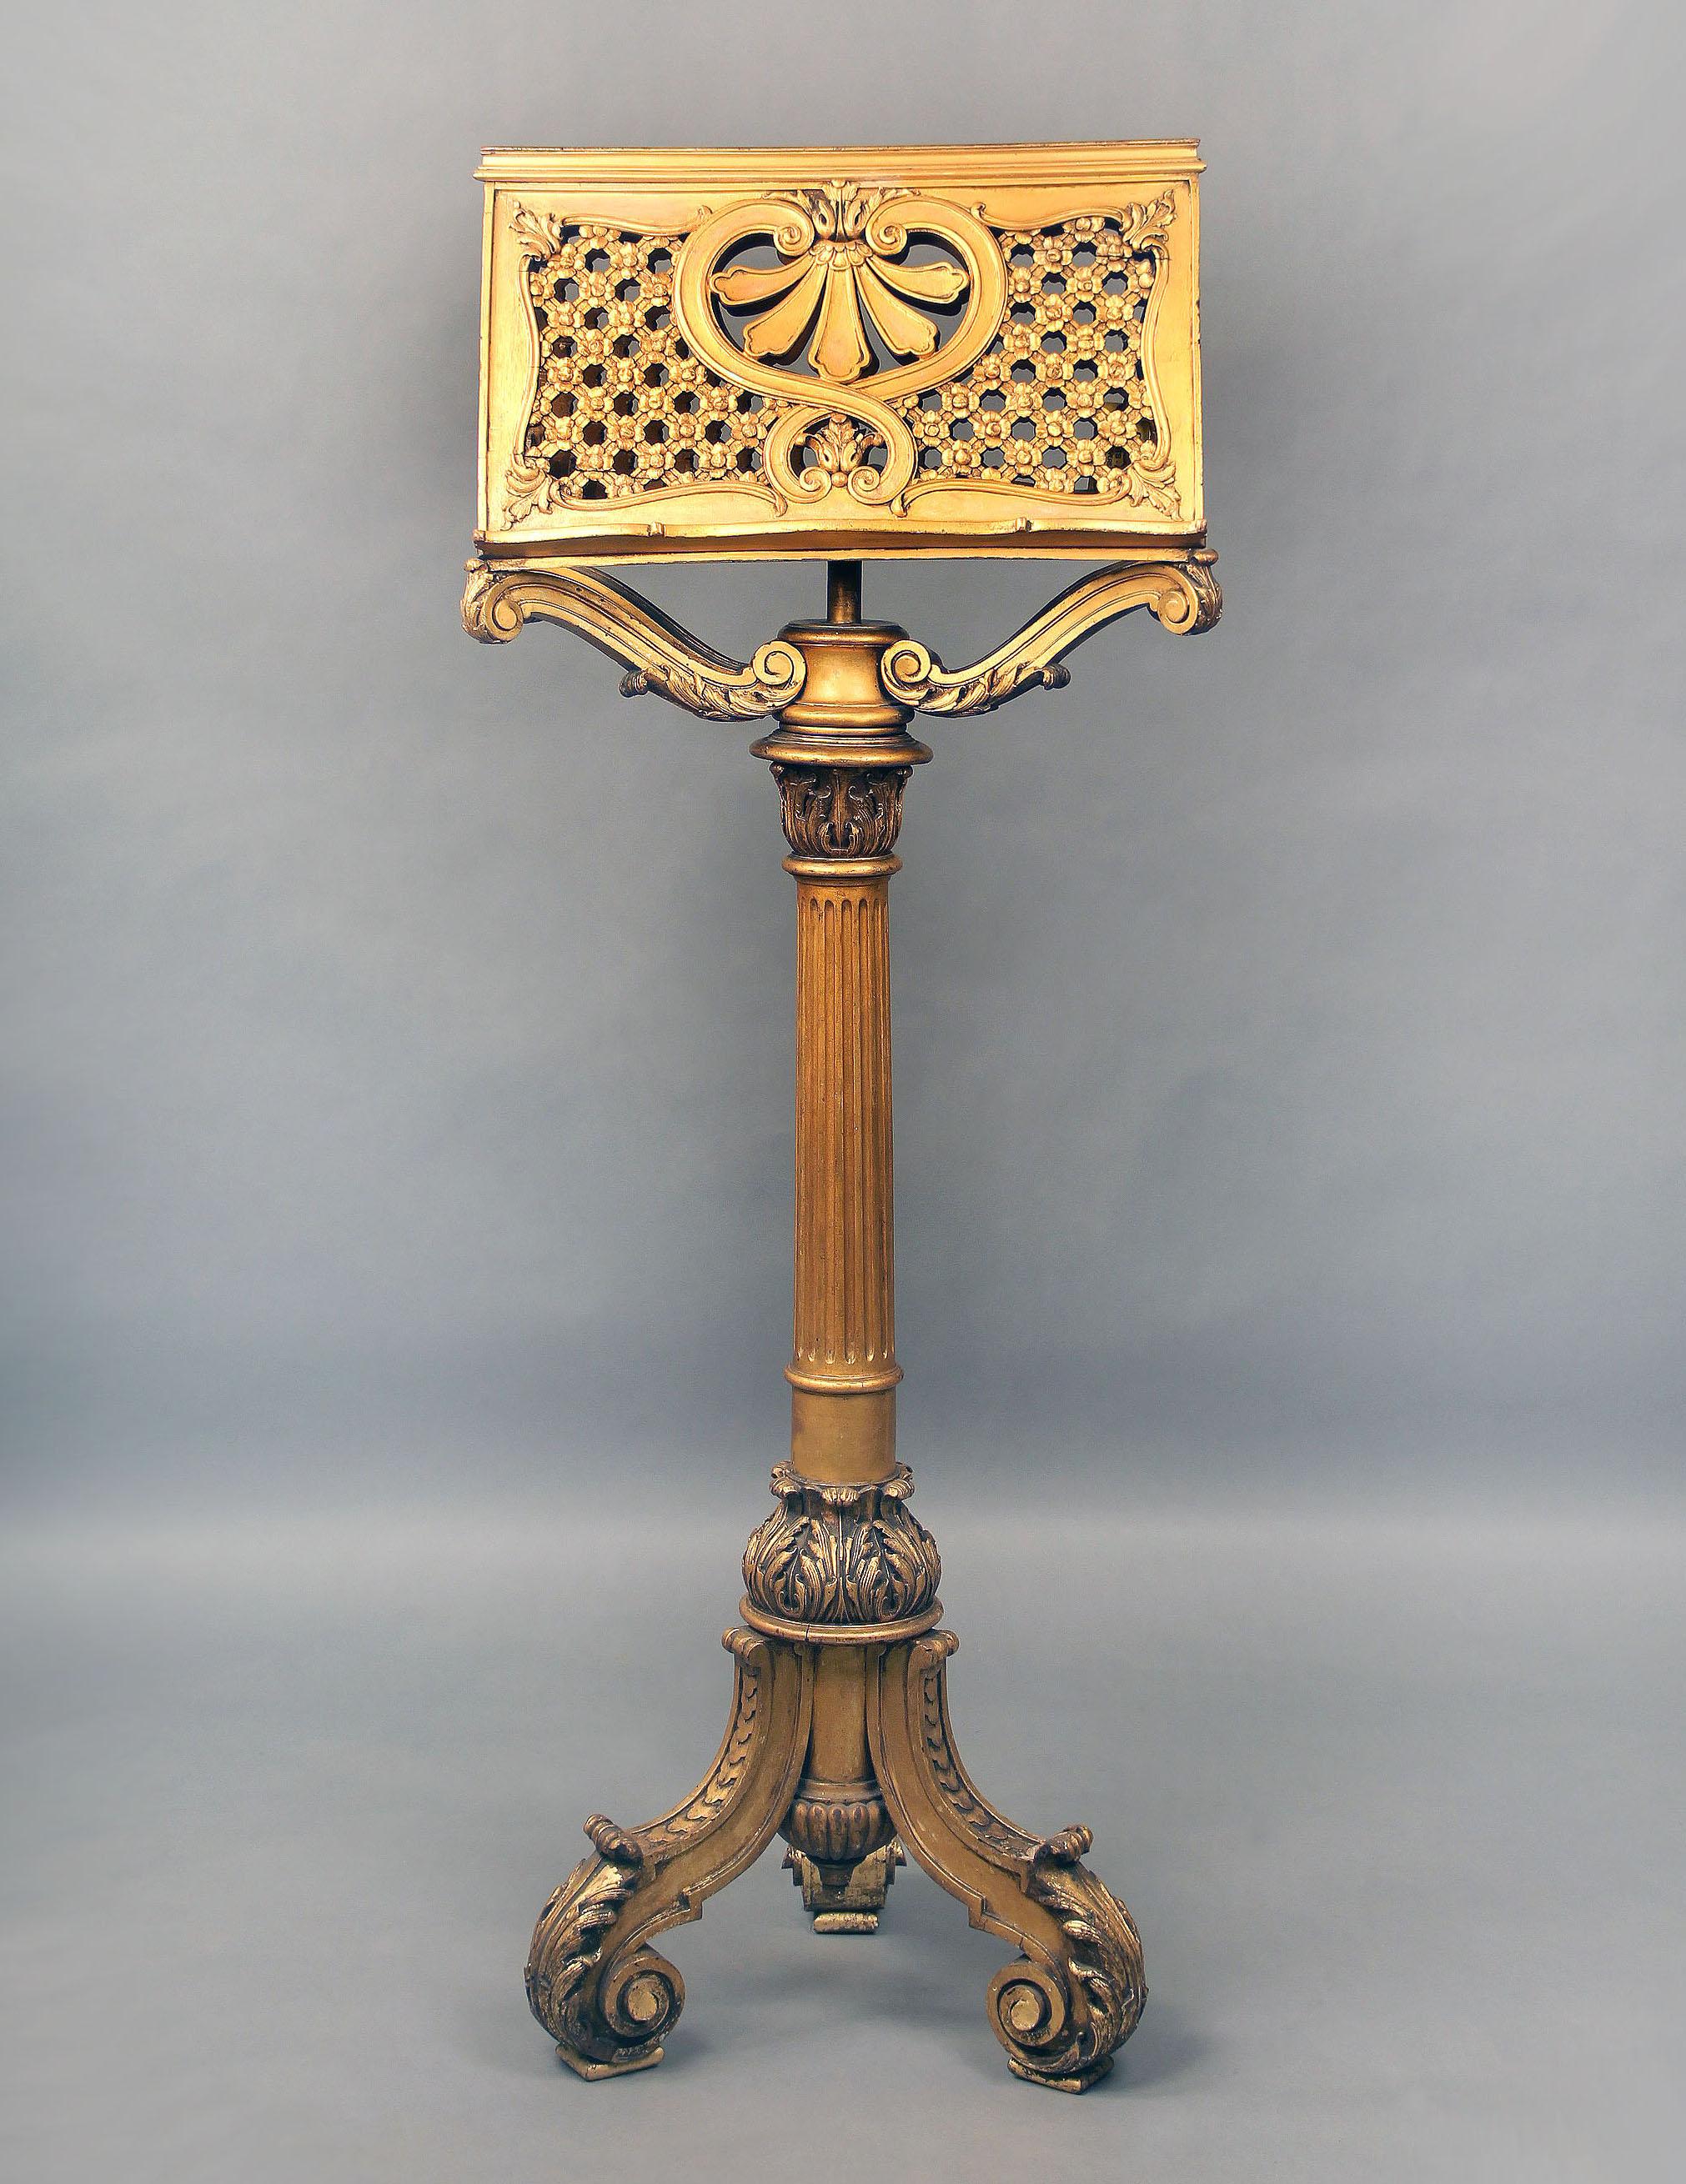 A Nice and Rare late 19th century Hand Carved Giltwood Music Stand.

The decorative double sided music rack with reticulated floral designs held up by four arms, the long body leading down to three intricately carved legs.